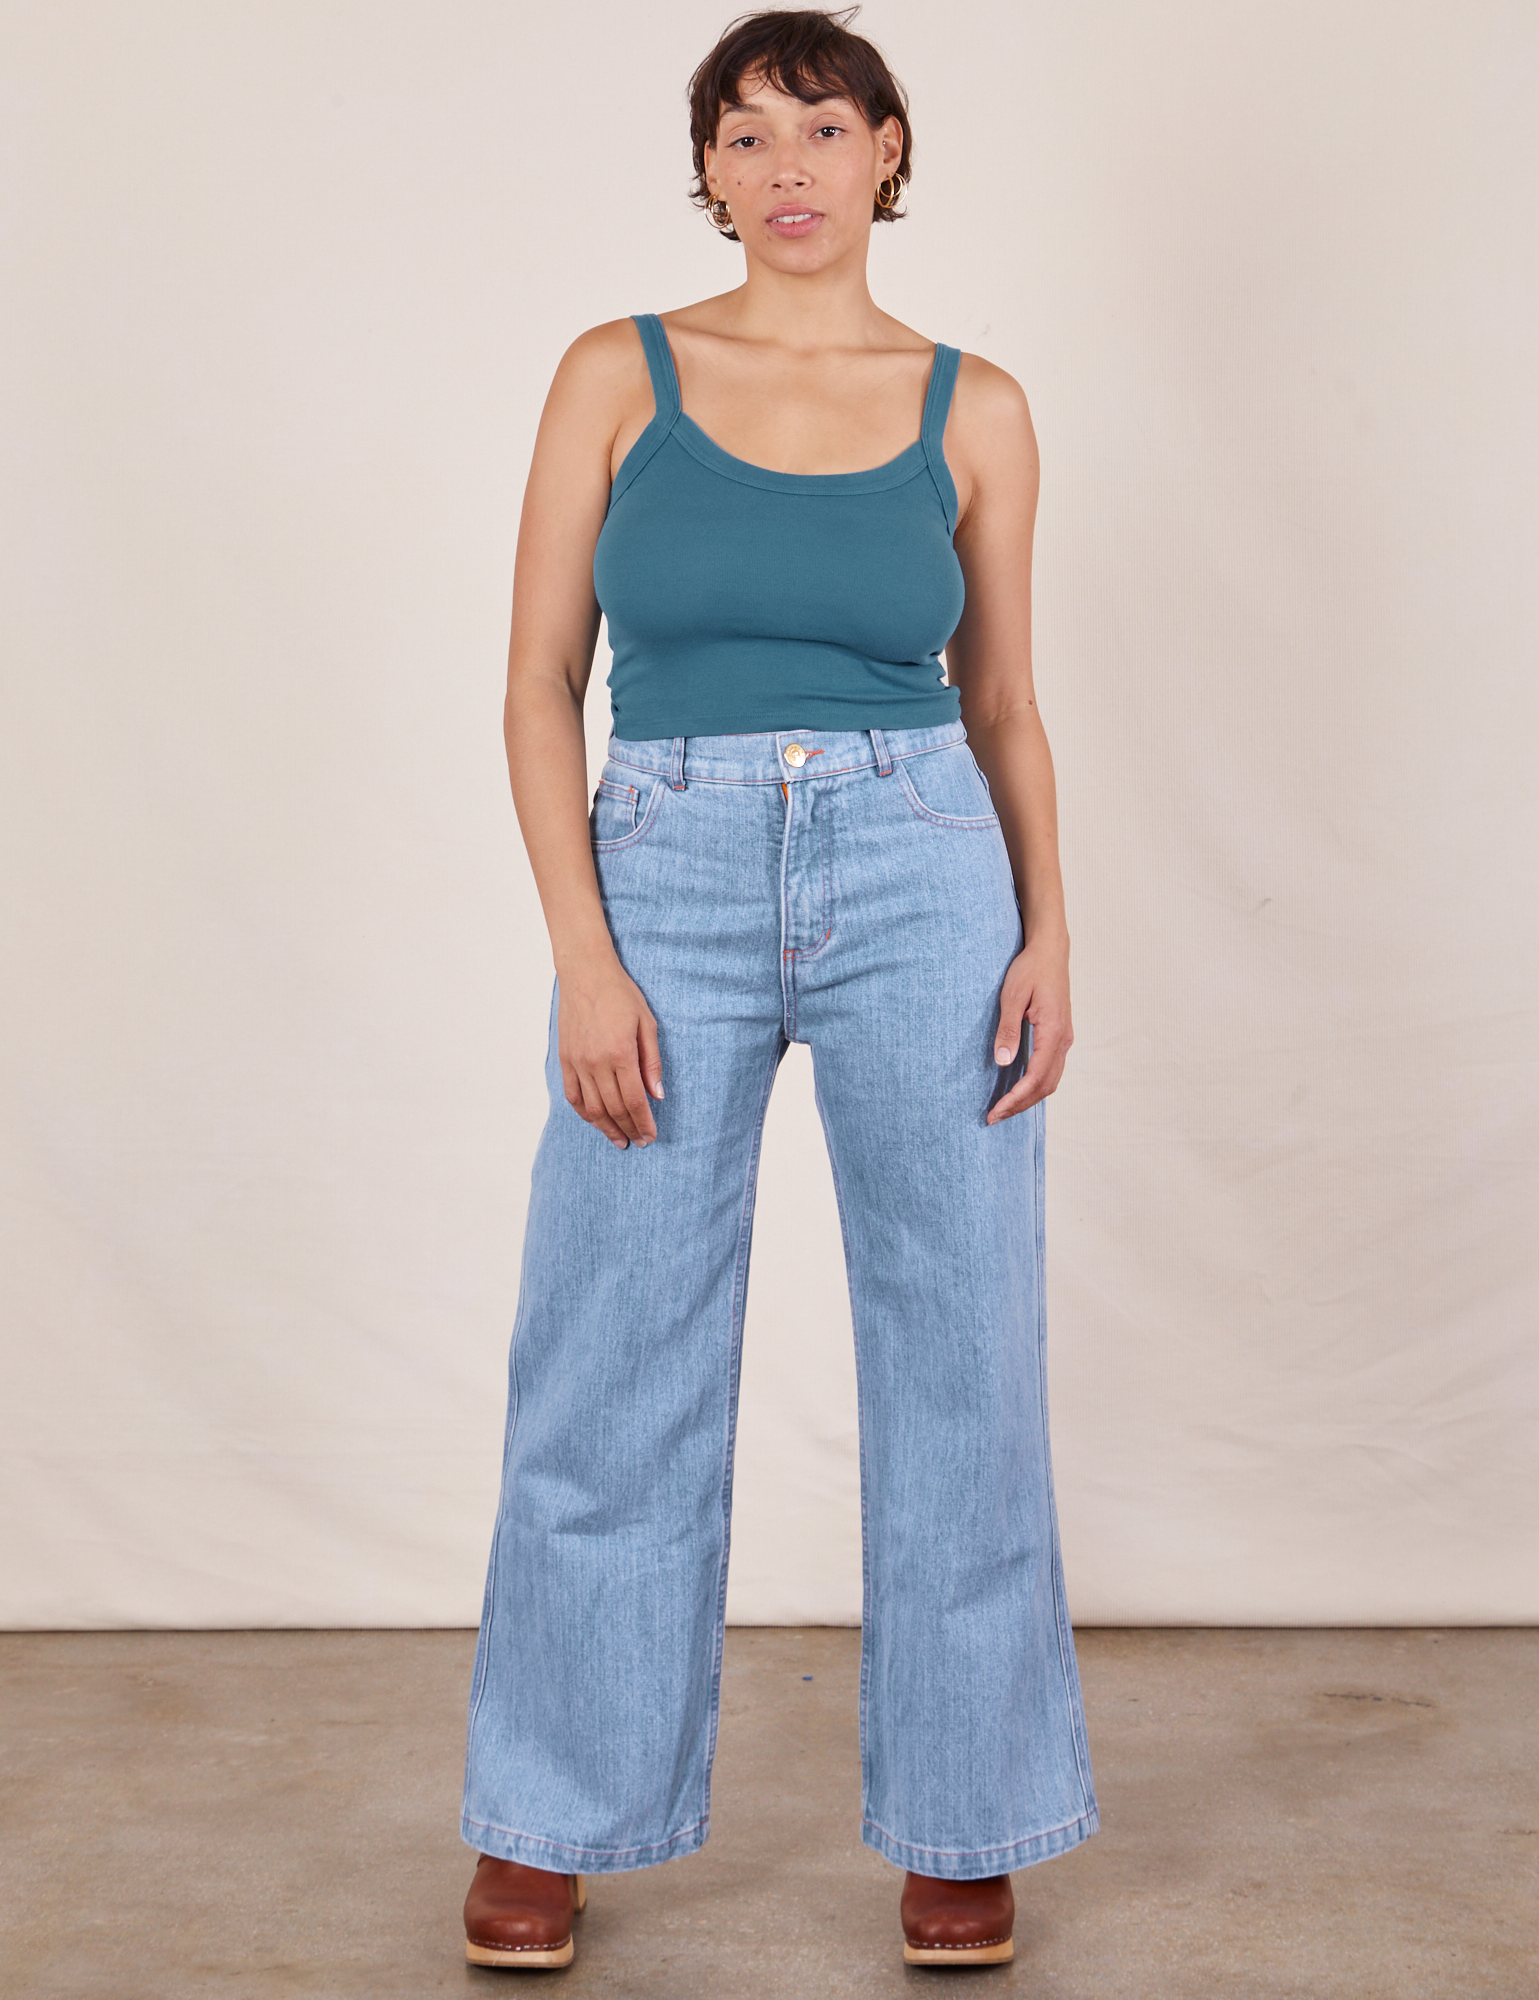 Tiara is wearing Cropped Cami in Marine Blue and light wash Sailor Jeans